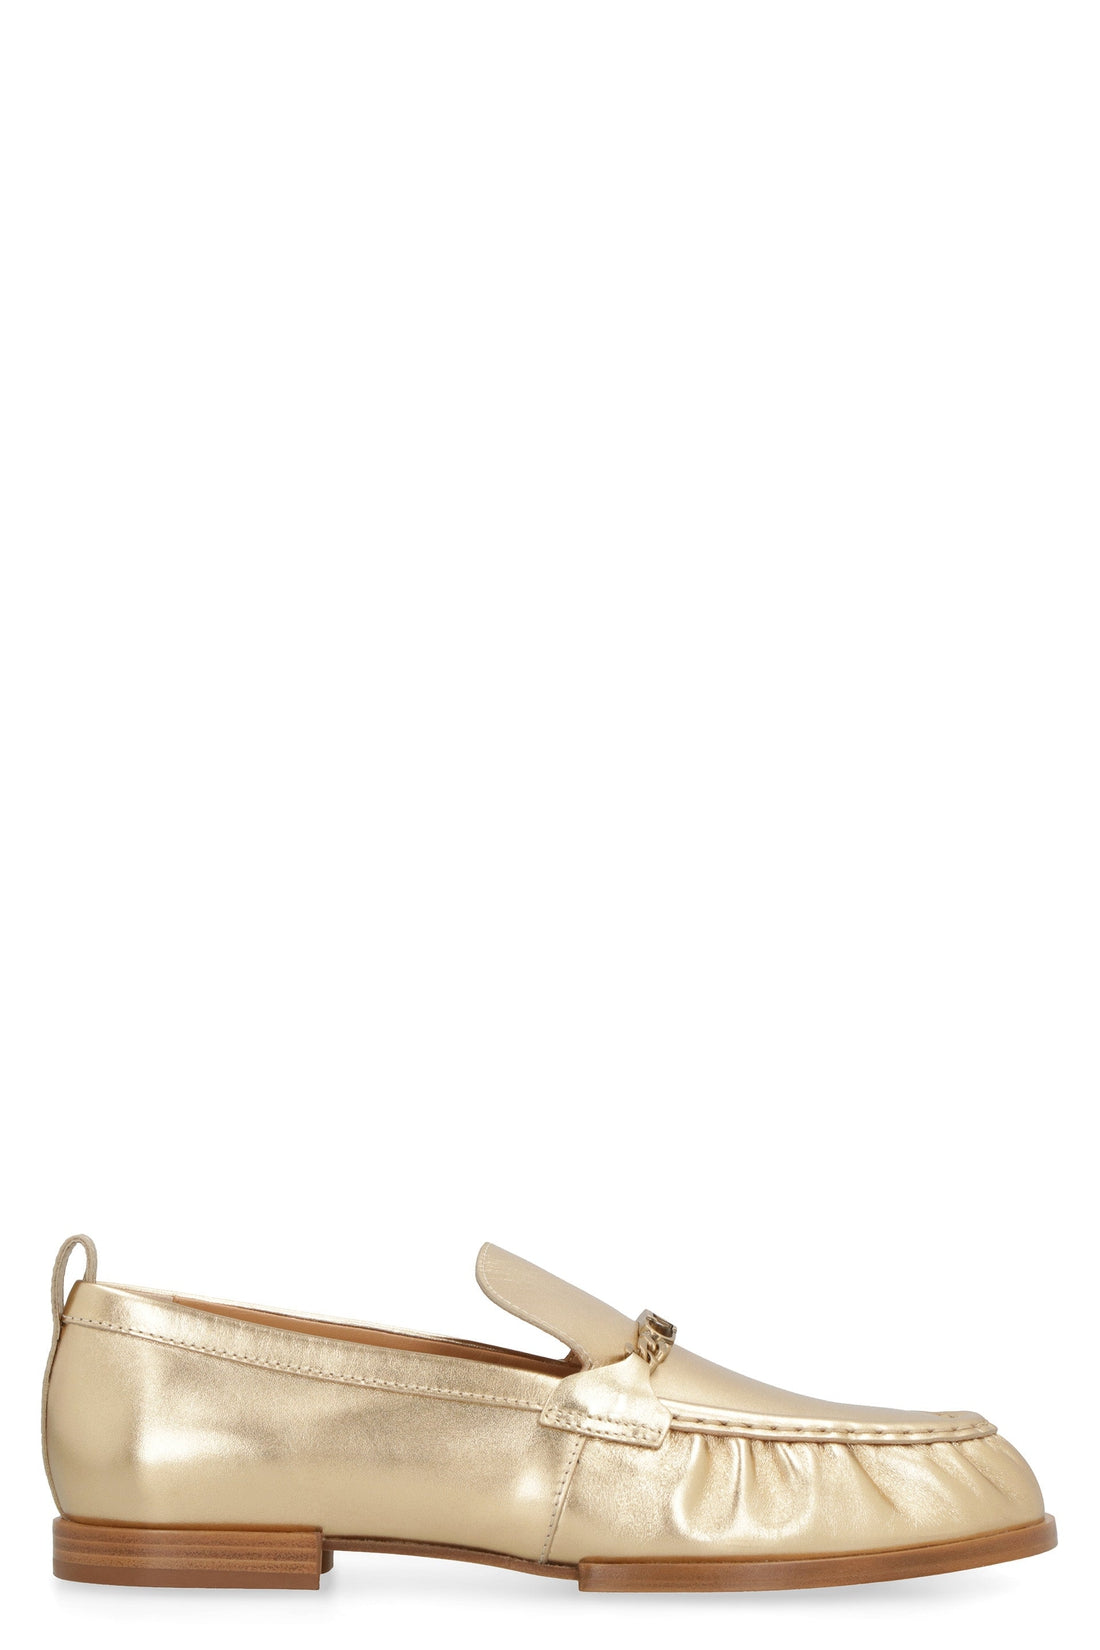 Tod's-OUTLET-SALE-Metallic leather loafers-ARCHIVIST